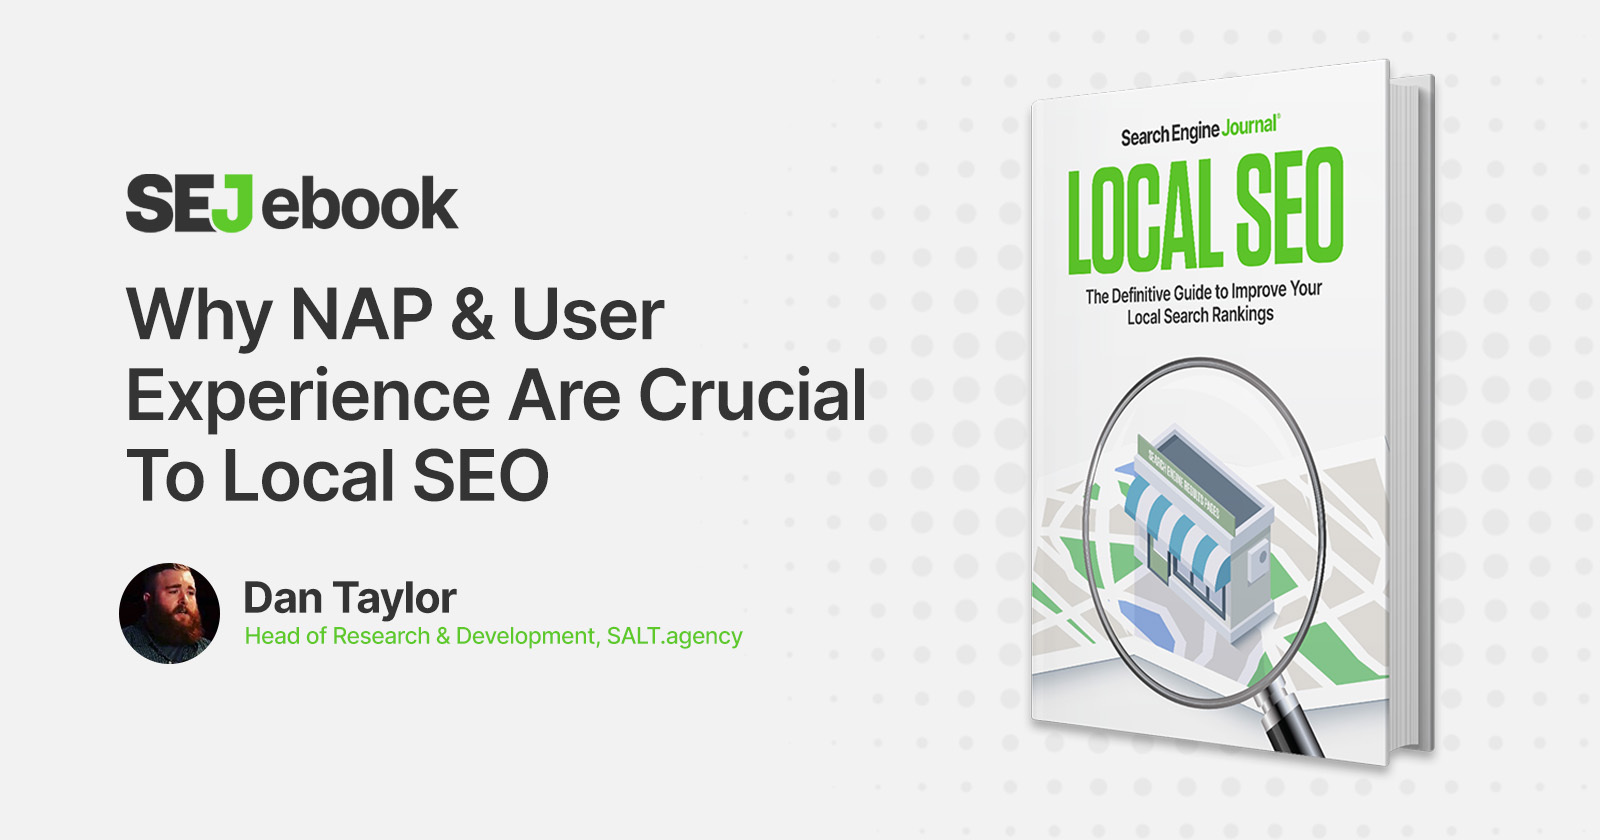 Why NAP & User Experience Are Crucial To Local SEO via @sejournal, @TaylorDanRW